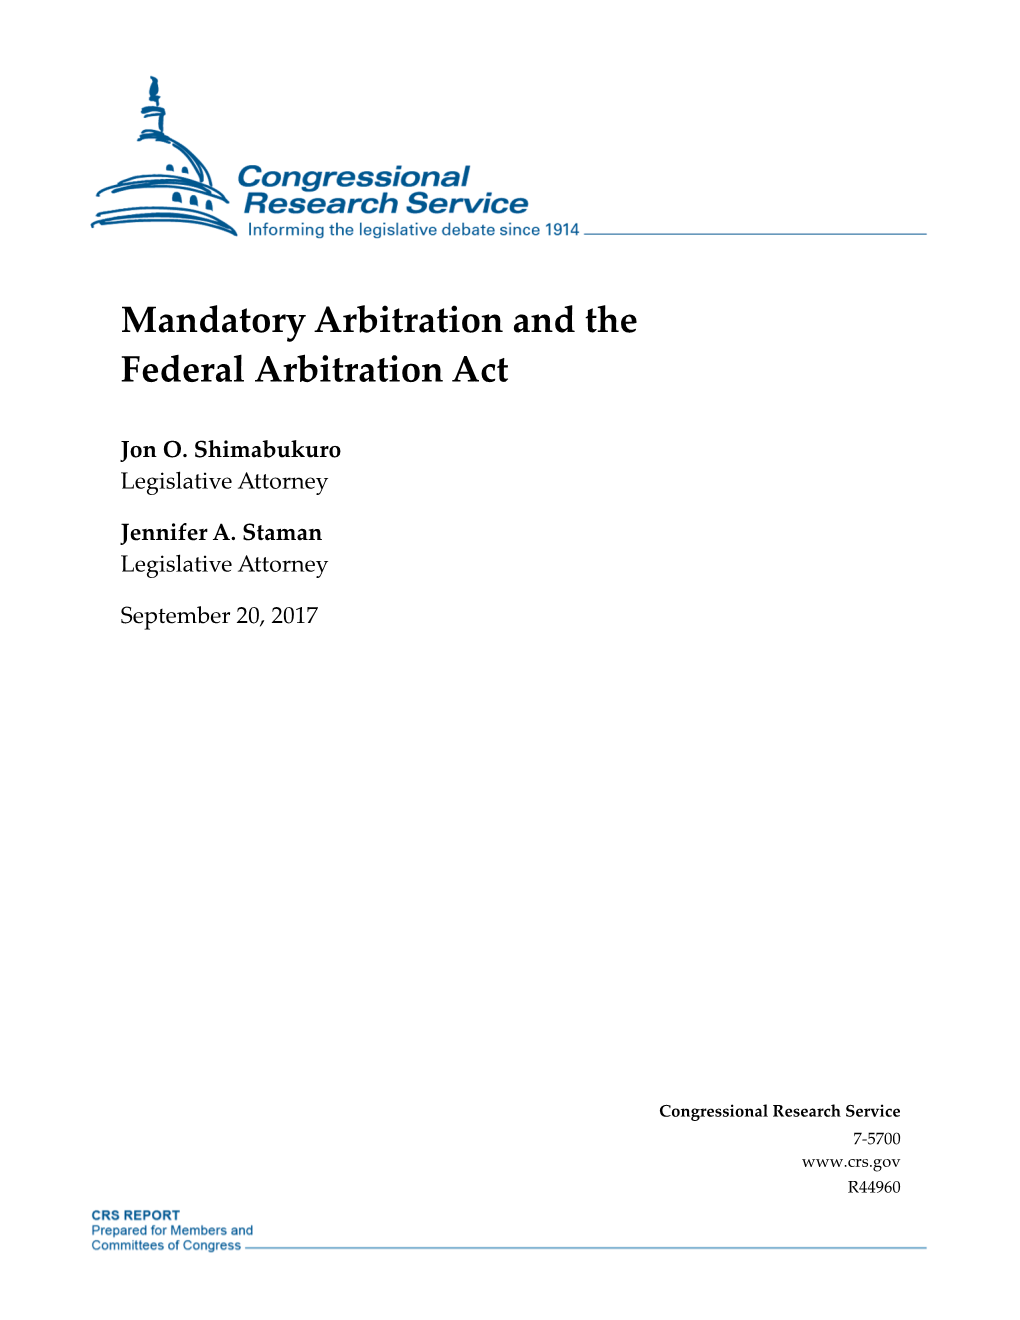 Federal Arbitration Act